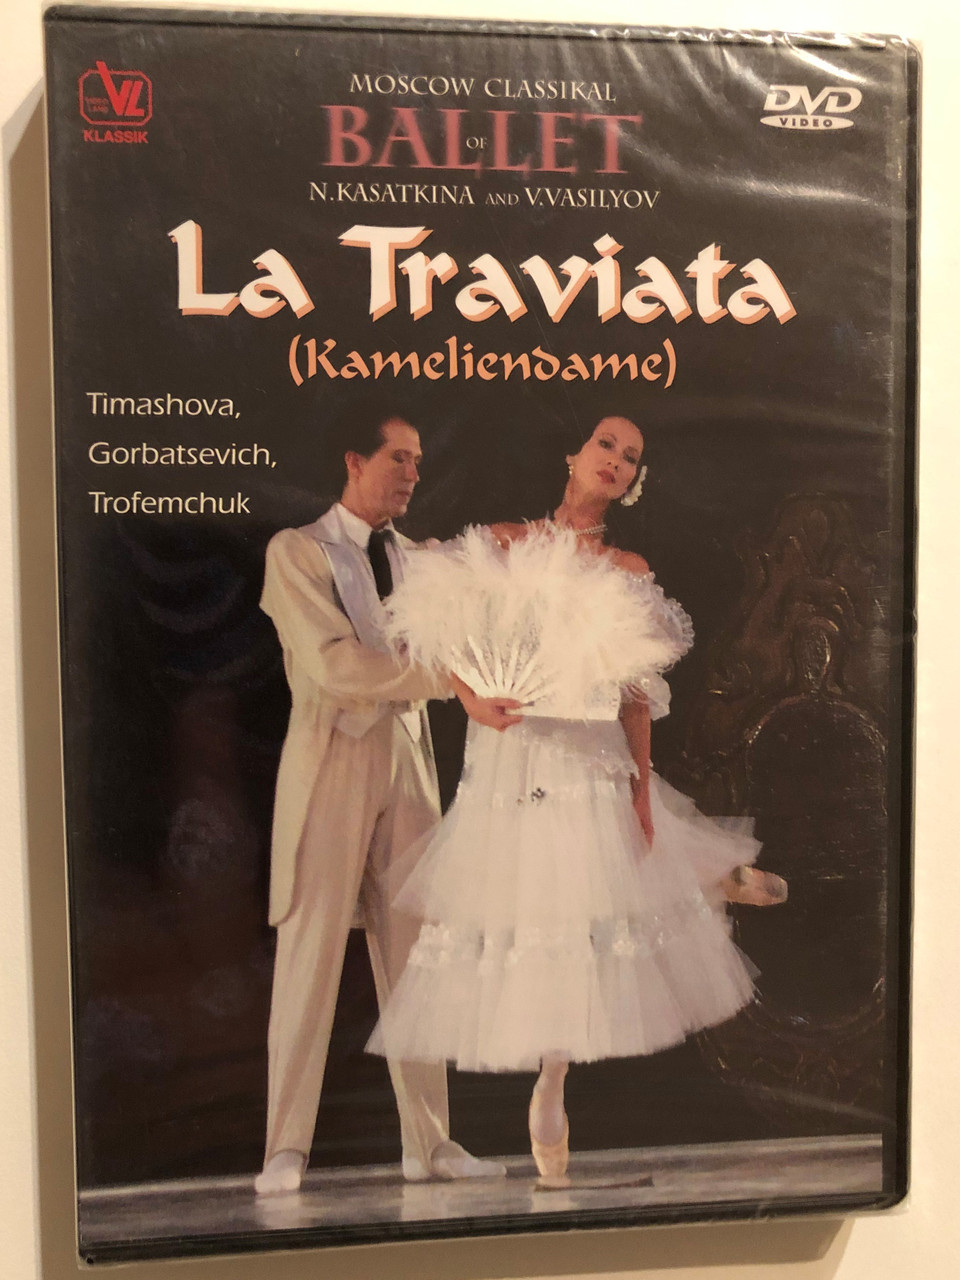 Verdi: La Traviata / La Traviata Ballet melodrama in two acts / MOSCOW  CLASSIKAL BALLET N.KASATKINA AND V.VASILYOV / Orchester des "Moscow  Classikal Ballet" / Conductor: Petuhof Alexander / DVD - bibleinmylanguage